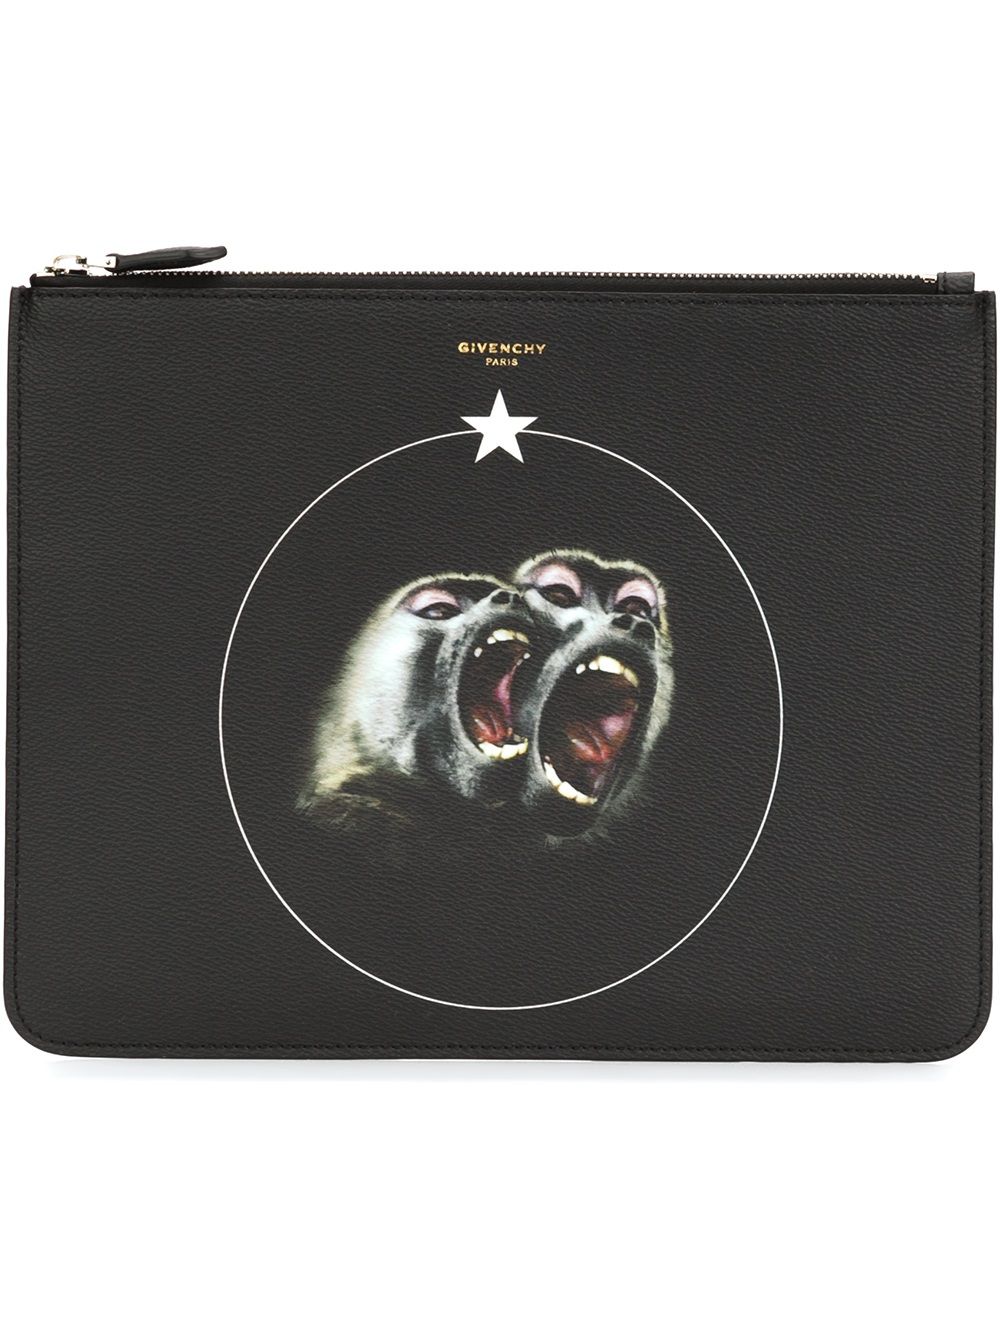 Givenchy Monkey Brothers Clutch $495 